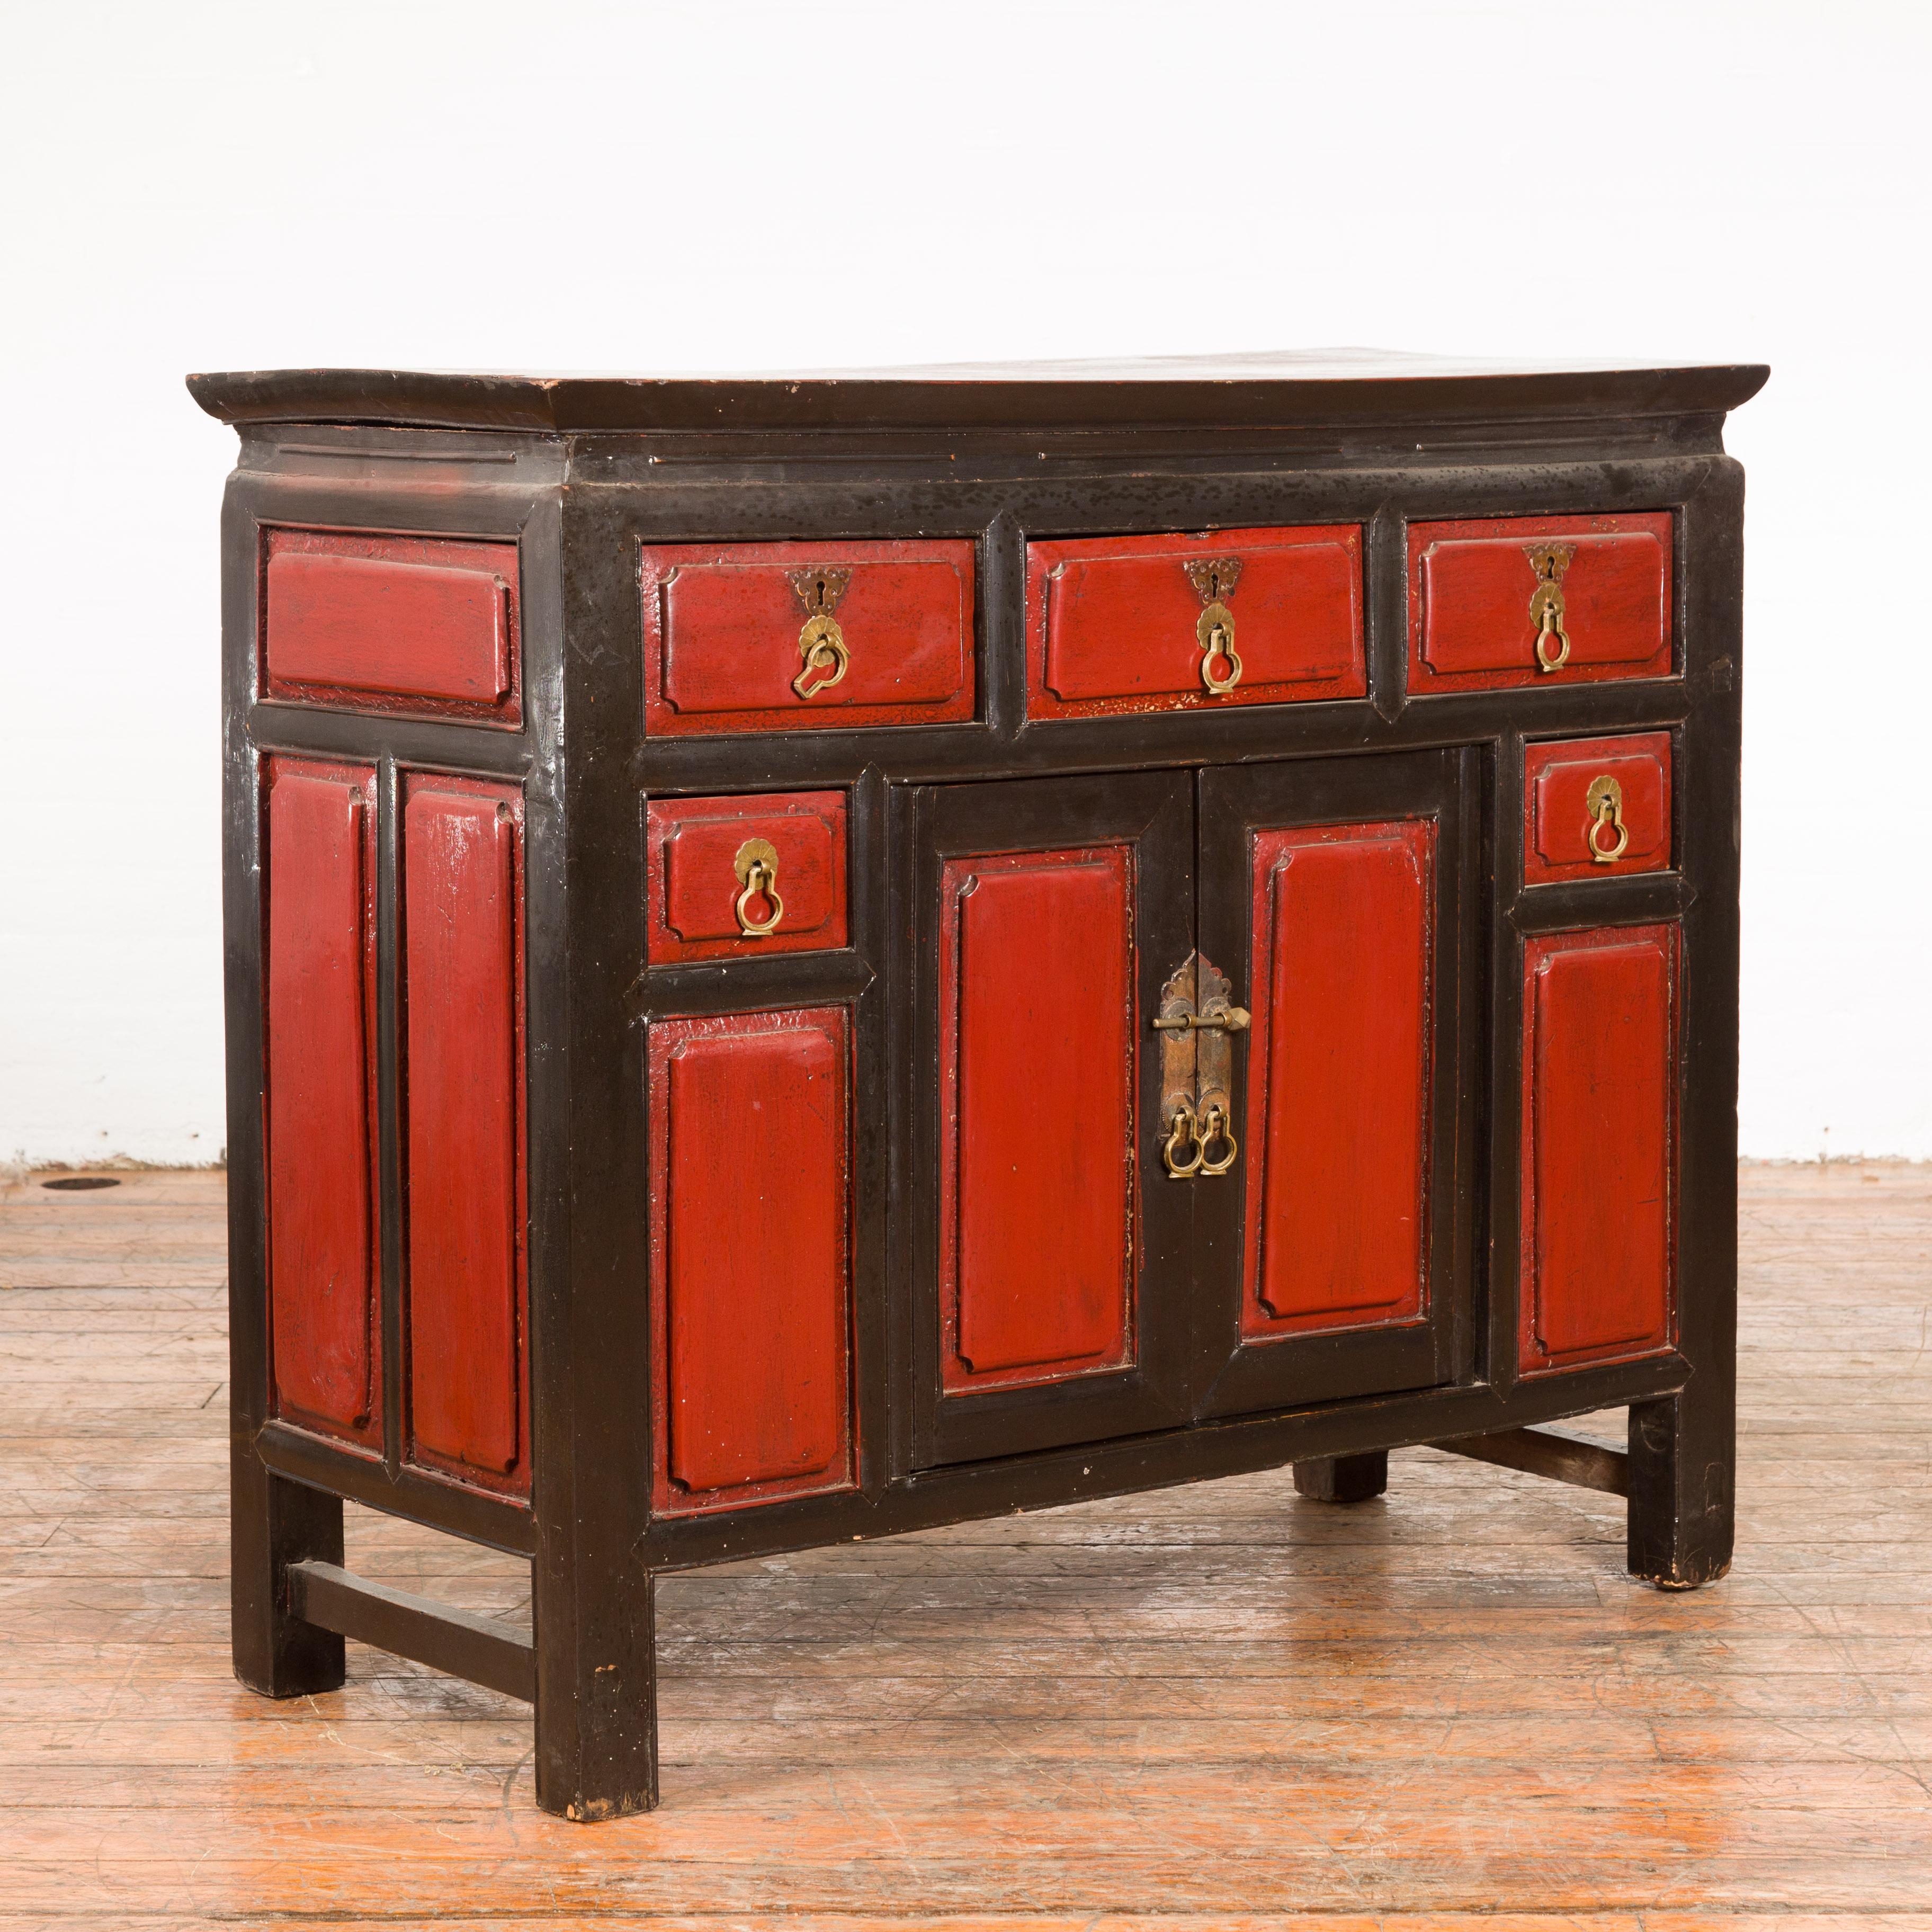 A Chinese Qing Dynasty period red and black lacquer cabinet from the 19th century, with five drawers and brass hardware. Created in China during the Qing Dynasty period, this cabinet features a red and black lacquered ground complimenting the